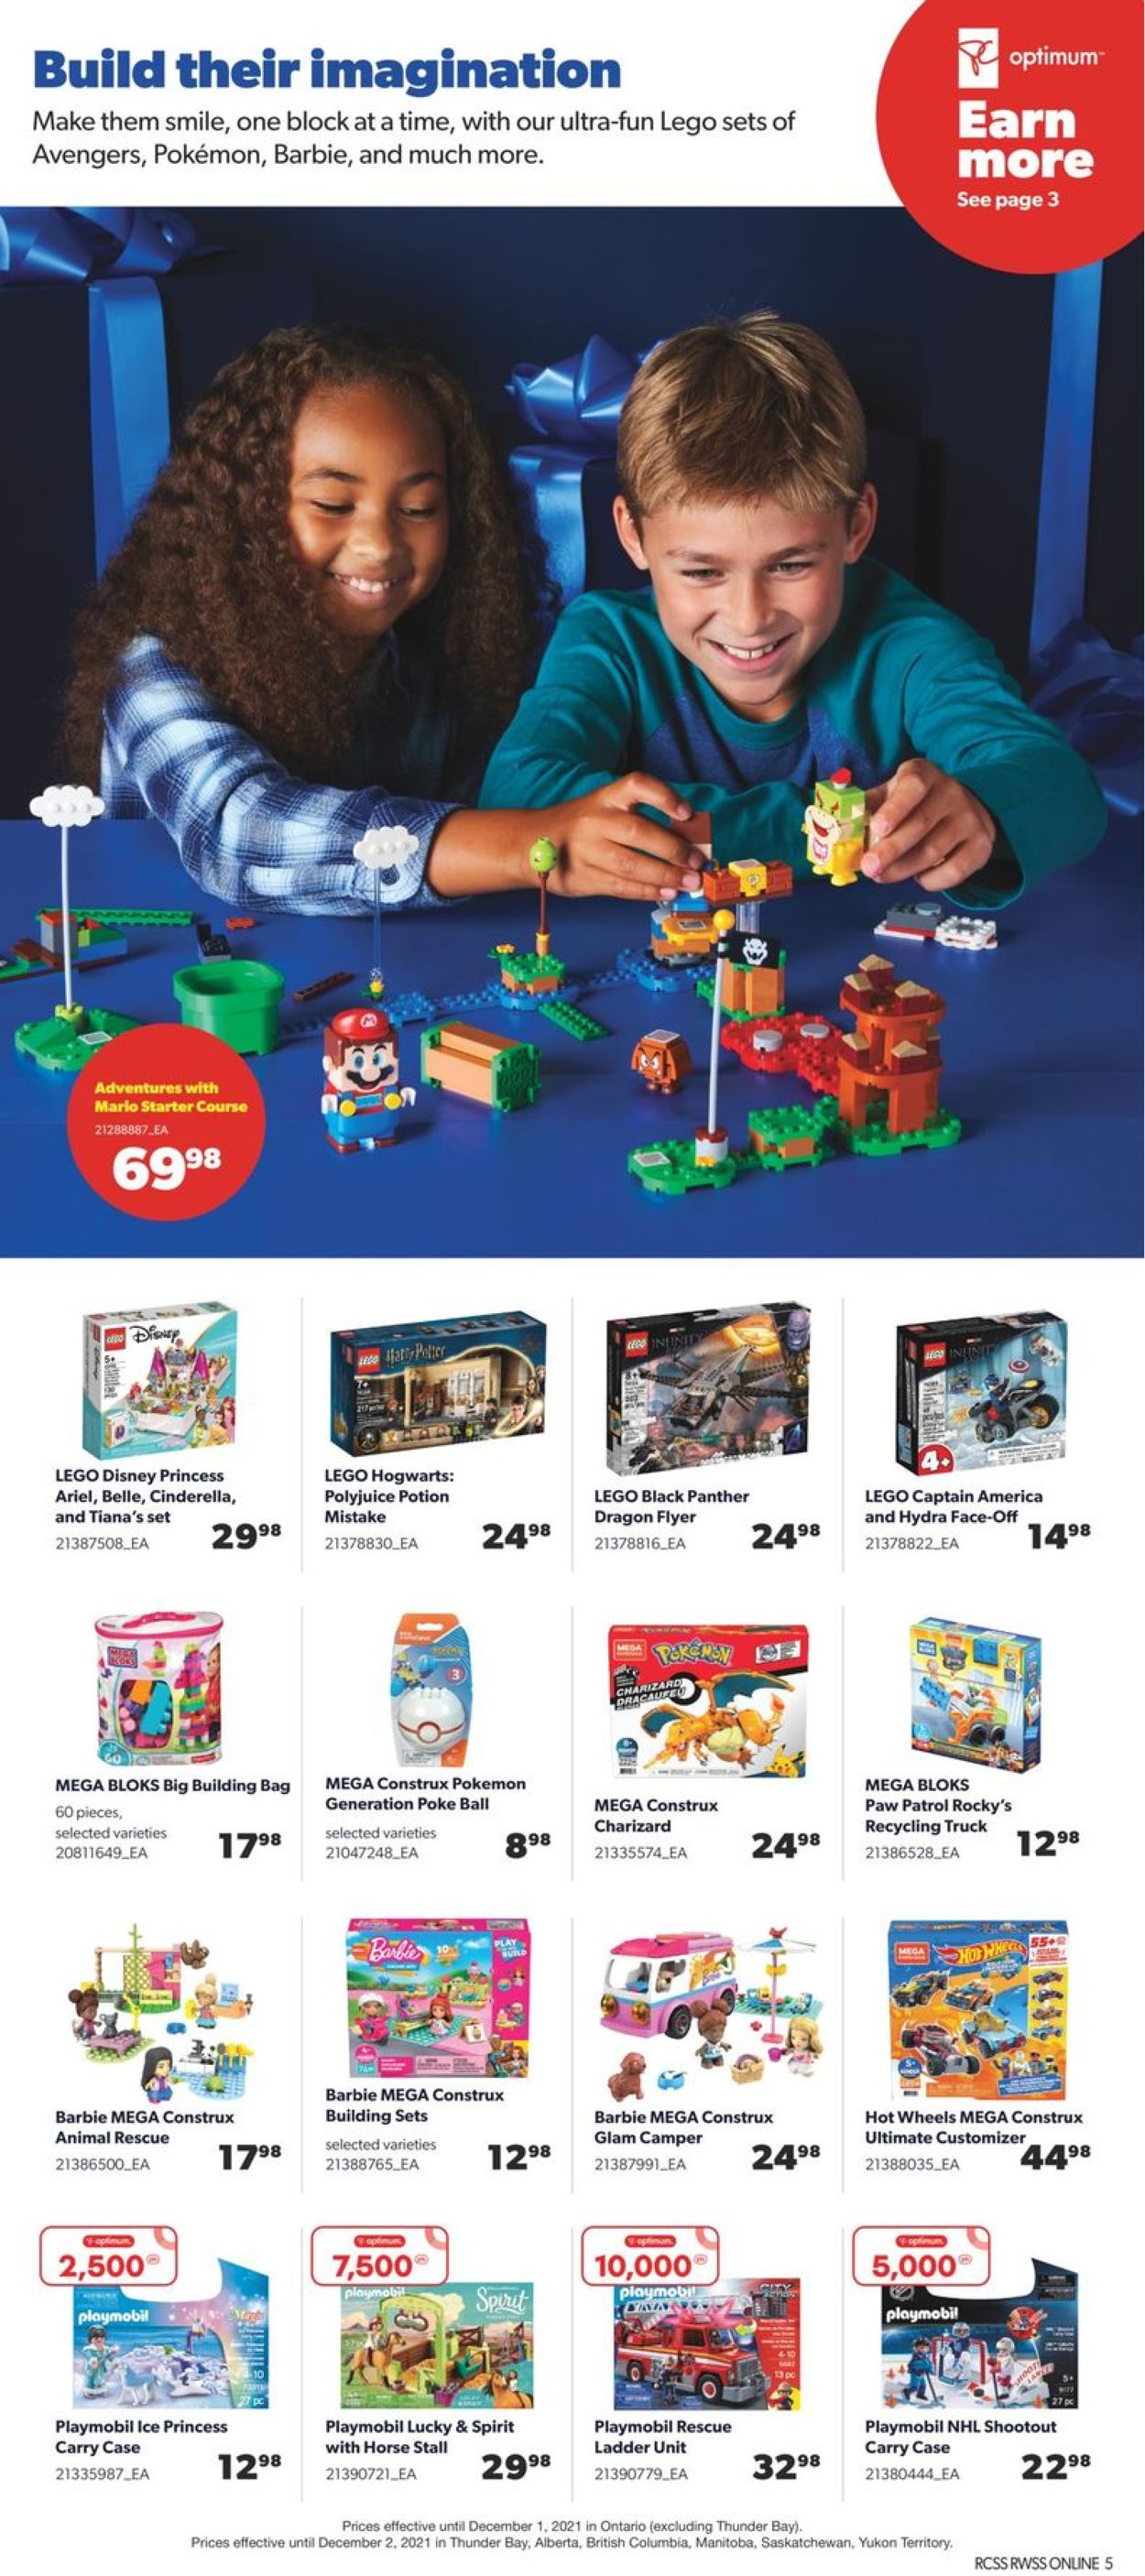 Real Canadian Superstore Flyer from 11/18/2021